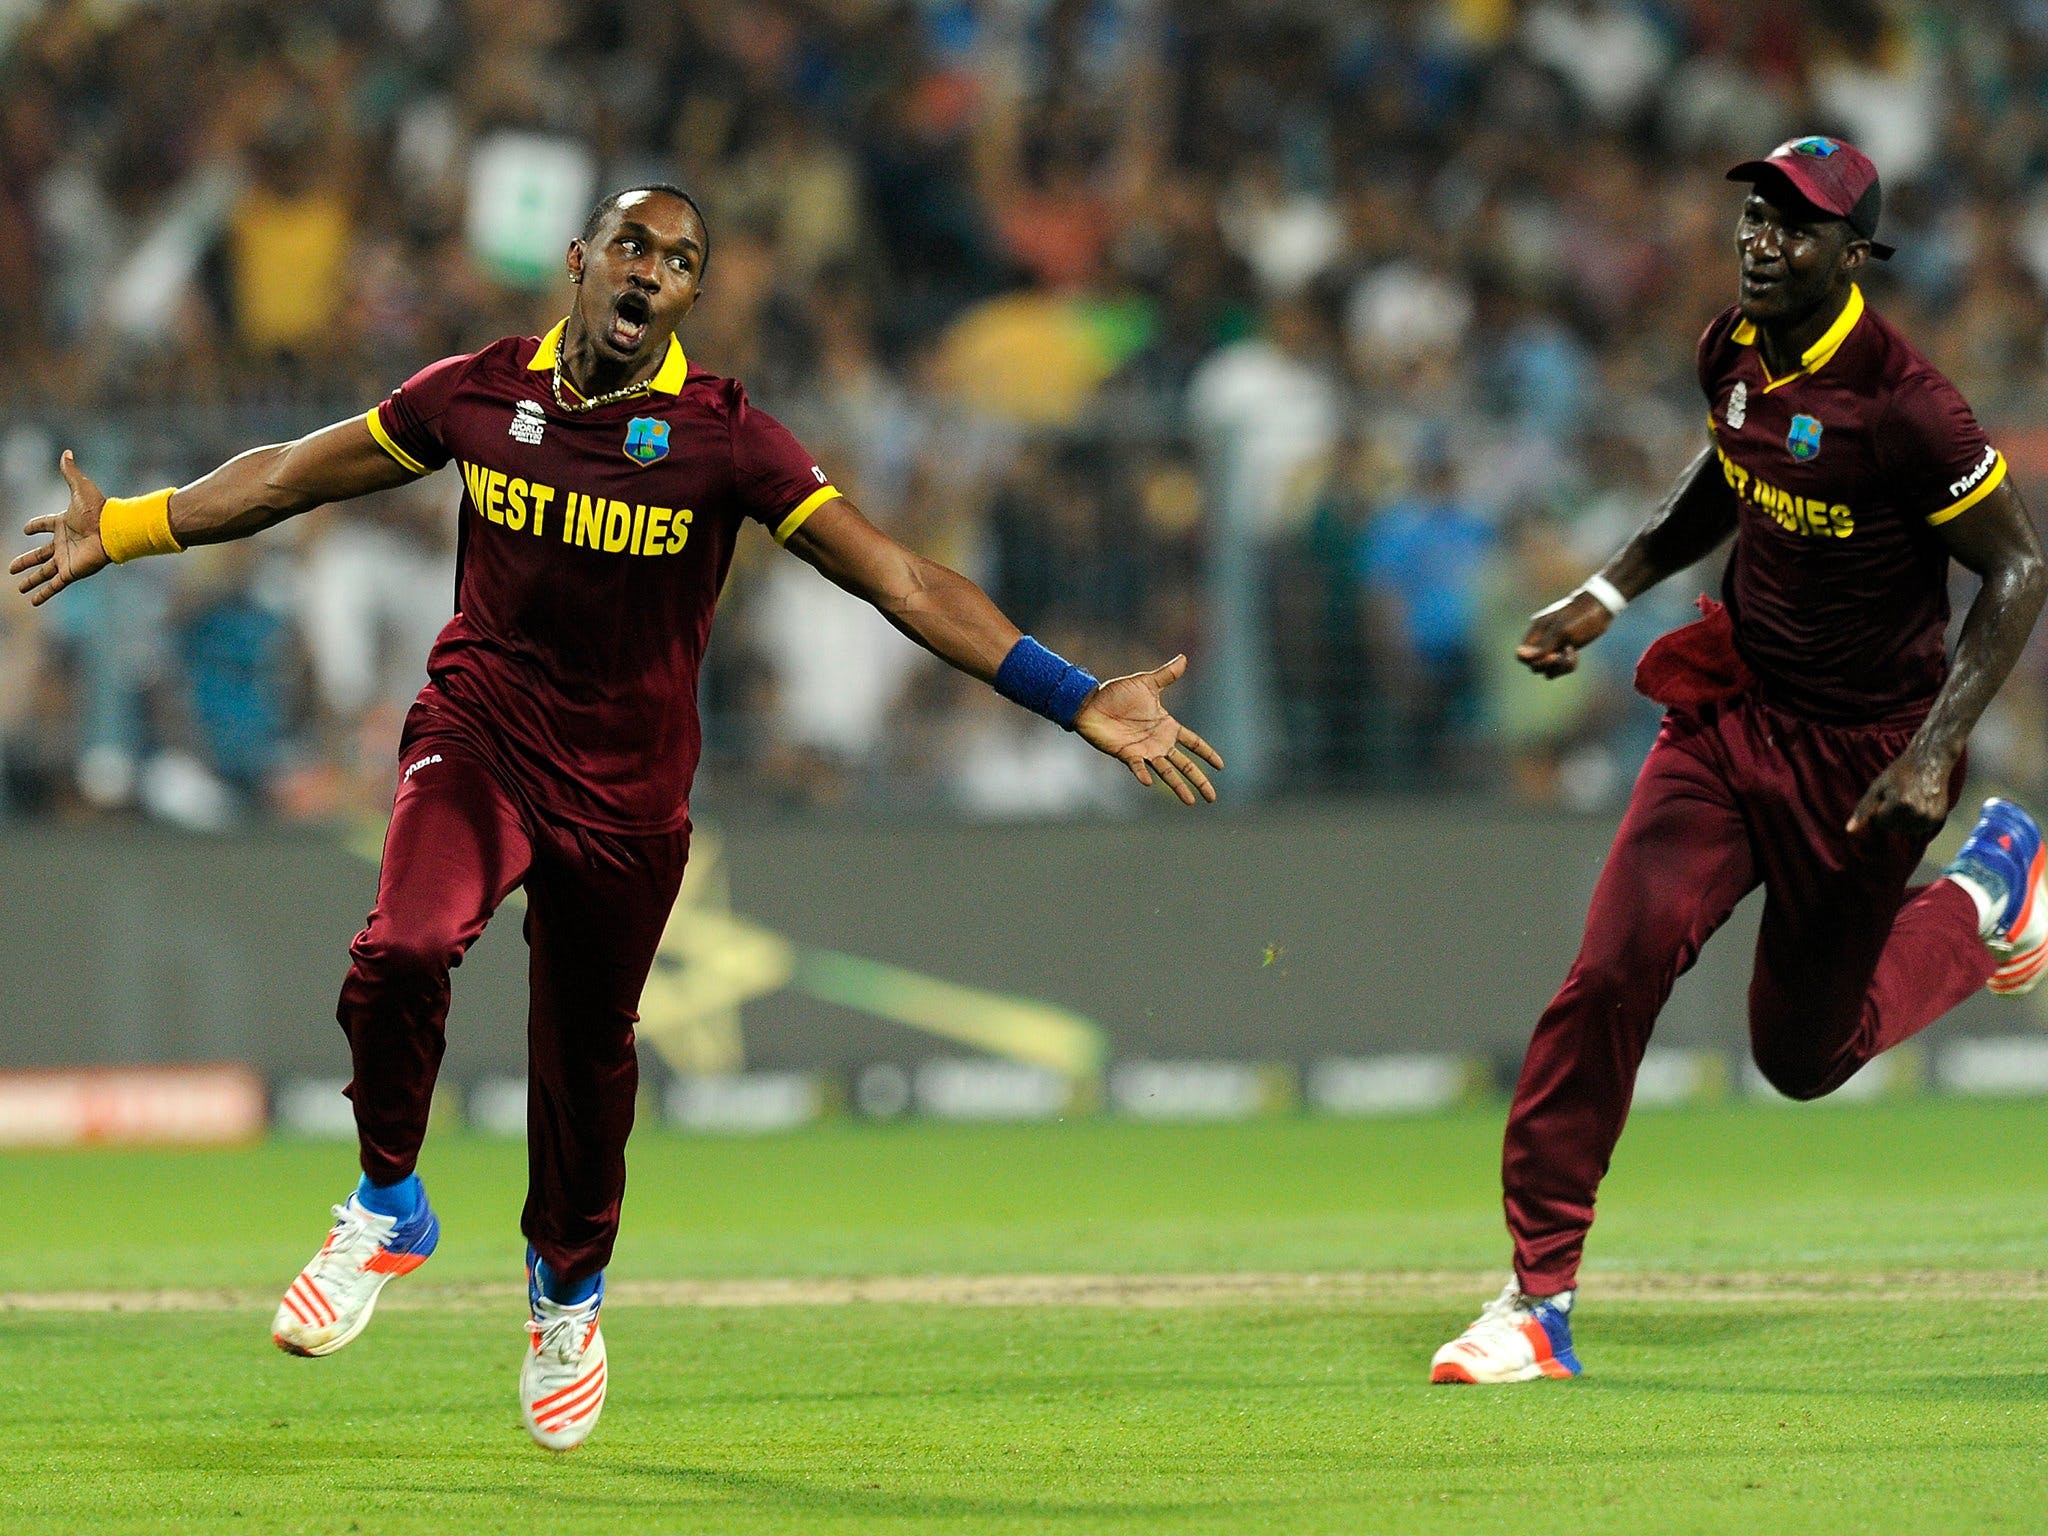 ICC Men's T20 World Cup - West Indies v Qualifier B2 - Accommodation Guide